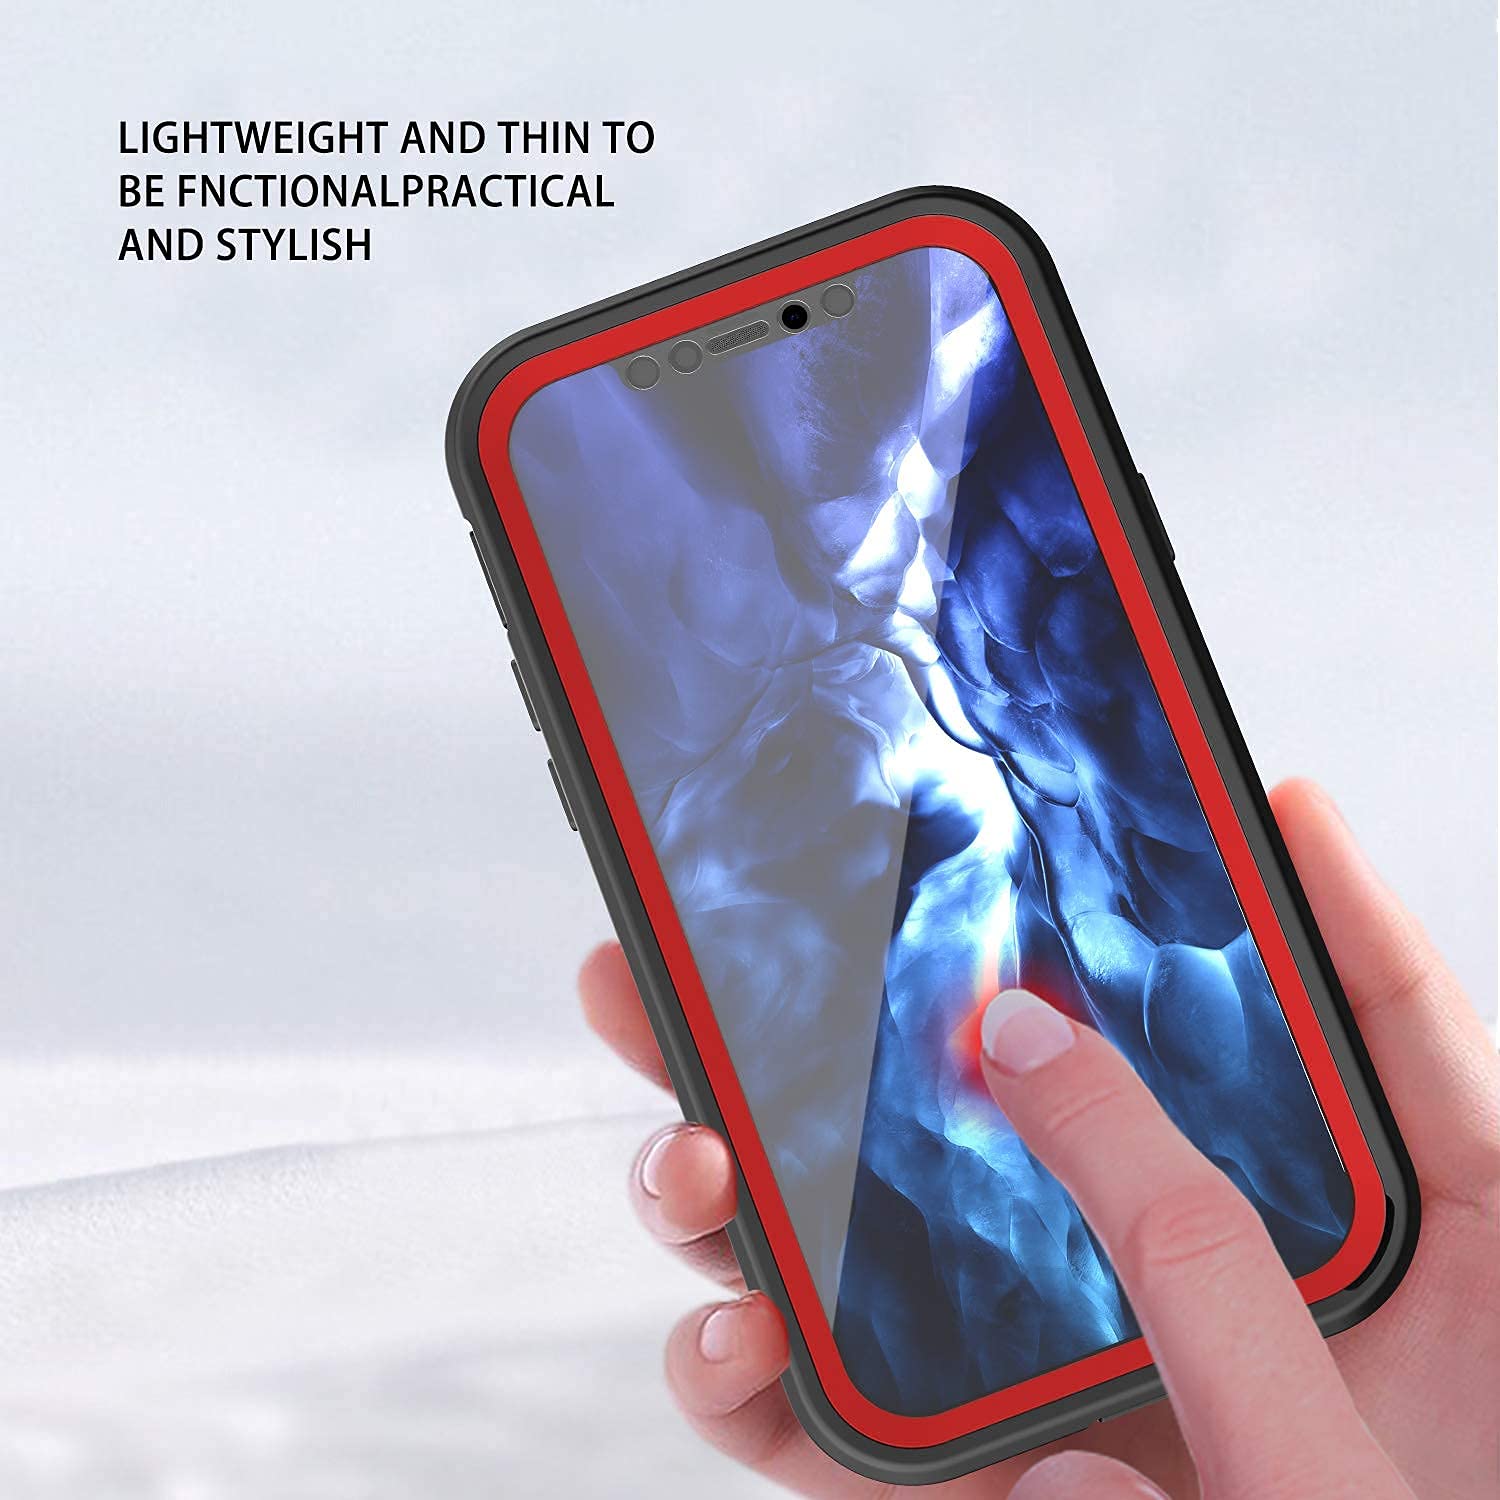 ImpactStrong Clear Case for iPhone 12/iPhone 12 Pro, Ultra Protective Case with Built-in Clear Screen Protector Full Body Cover (Red)